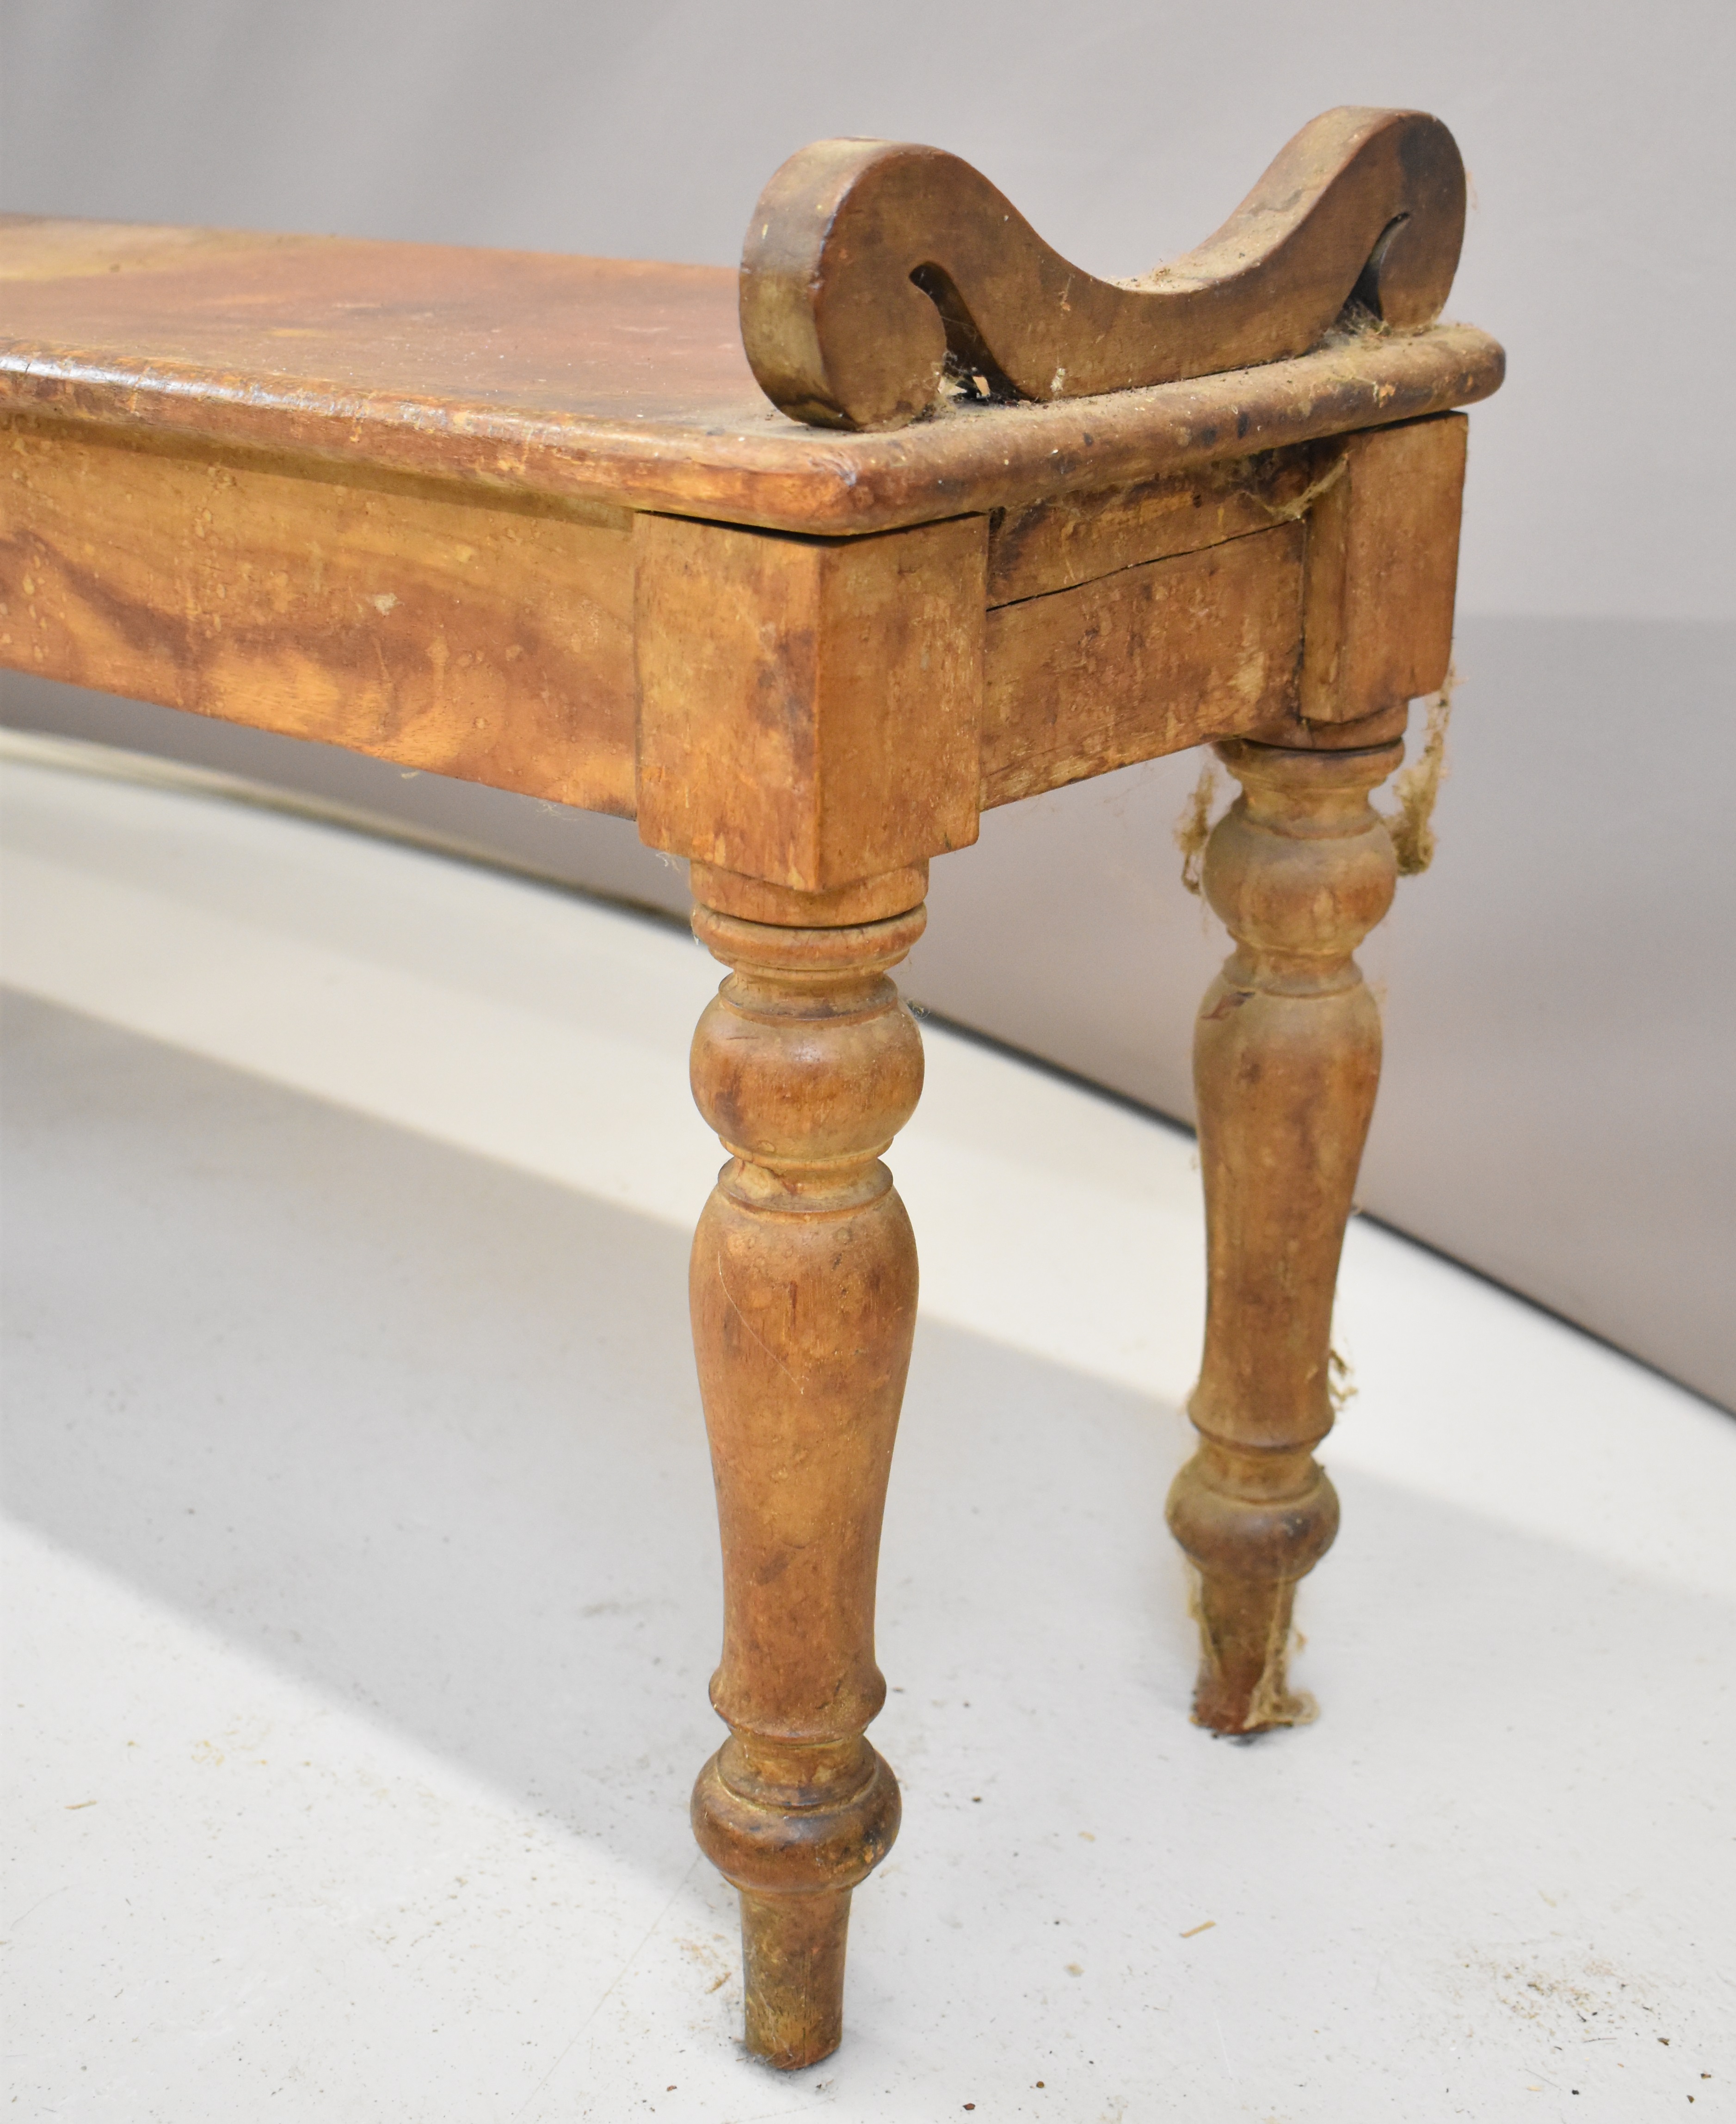 19thC ash window seat or low bench with scroll ends, raised on six turned legs, W193 x D30 x H46cm - Bild 4 aus 4